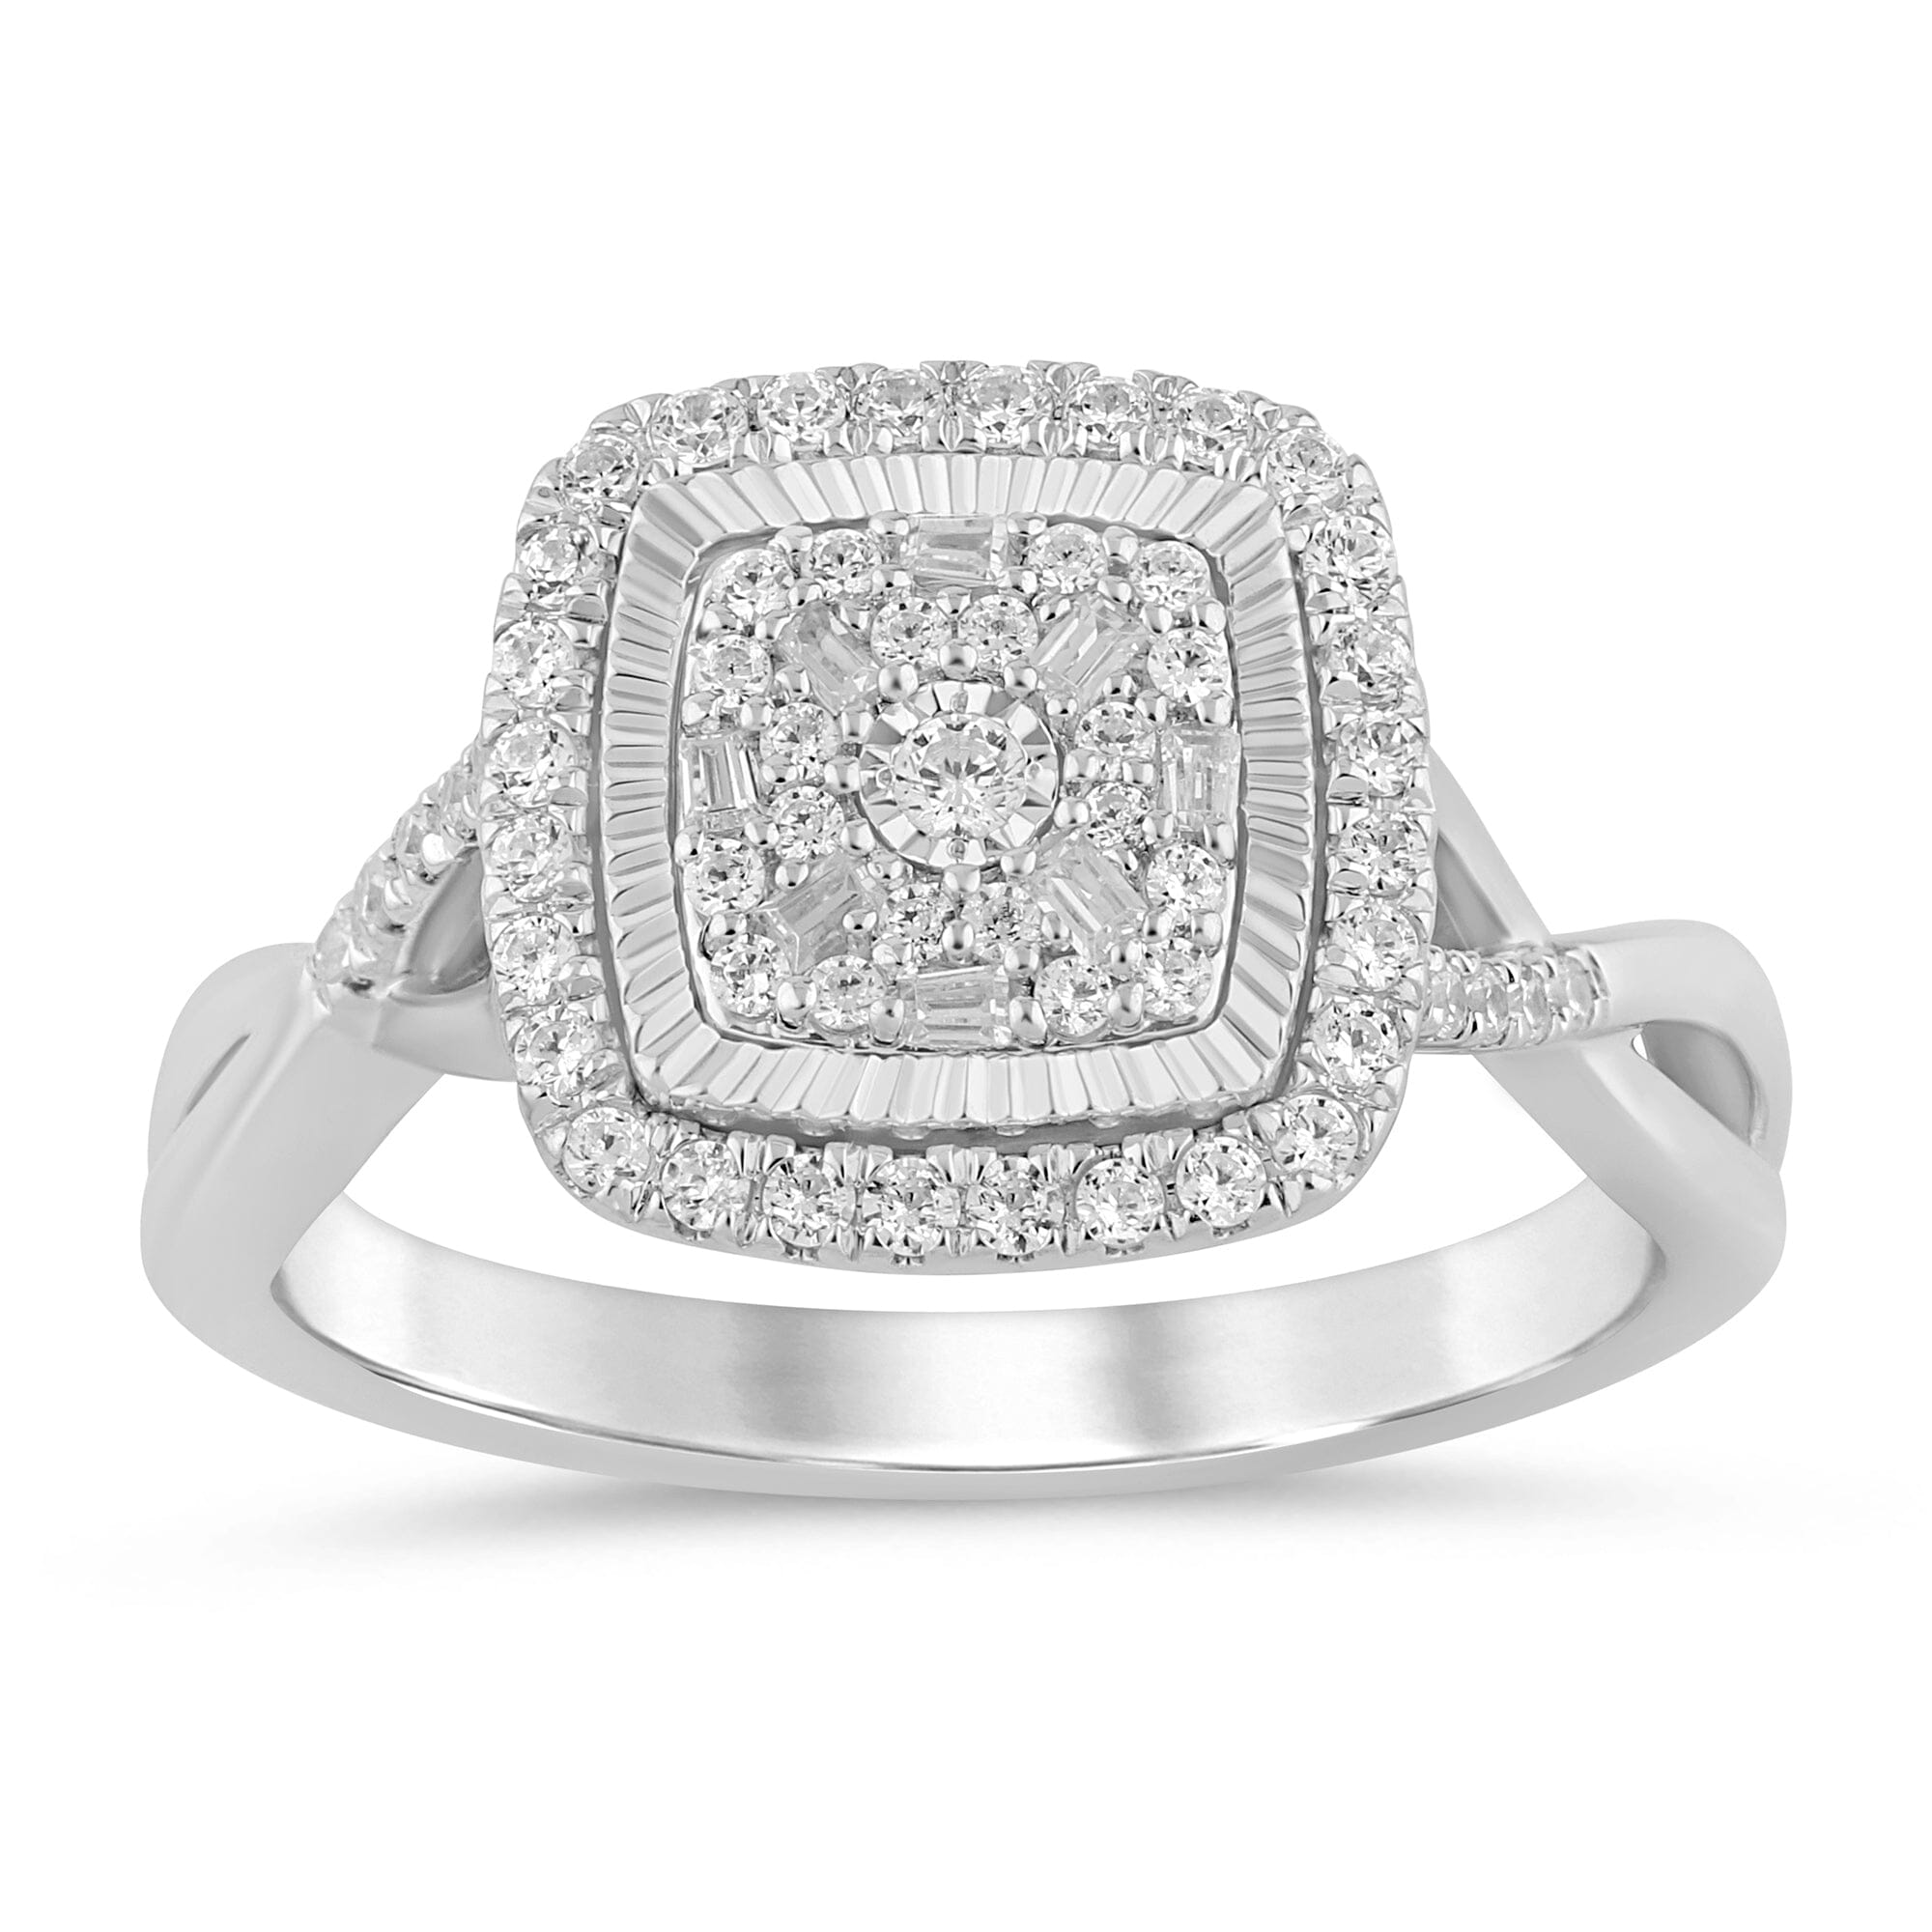 Miracle Halo Square Look Ring with 0.35ct of Diamonds in 9ct White Gold Rings Bevilles 